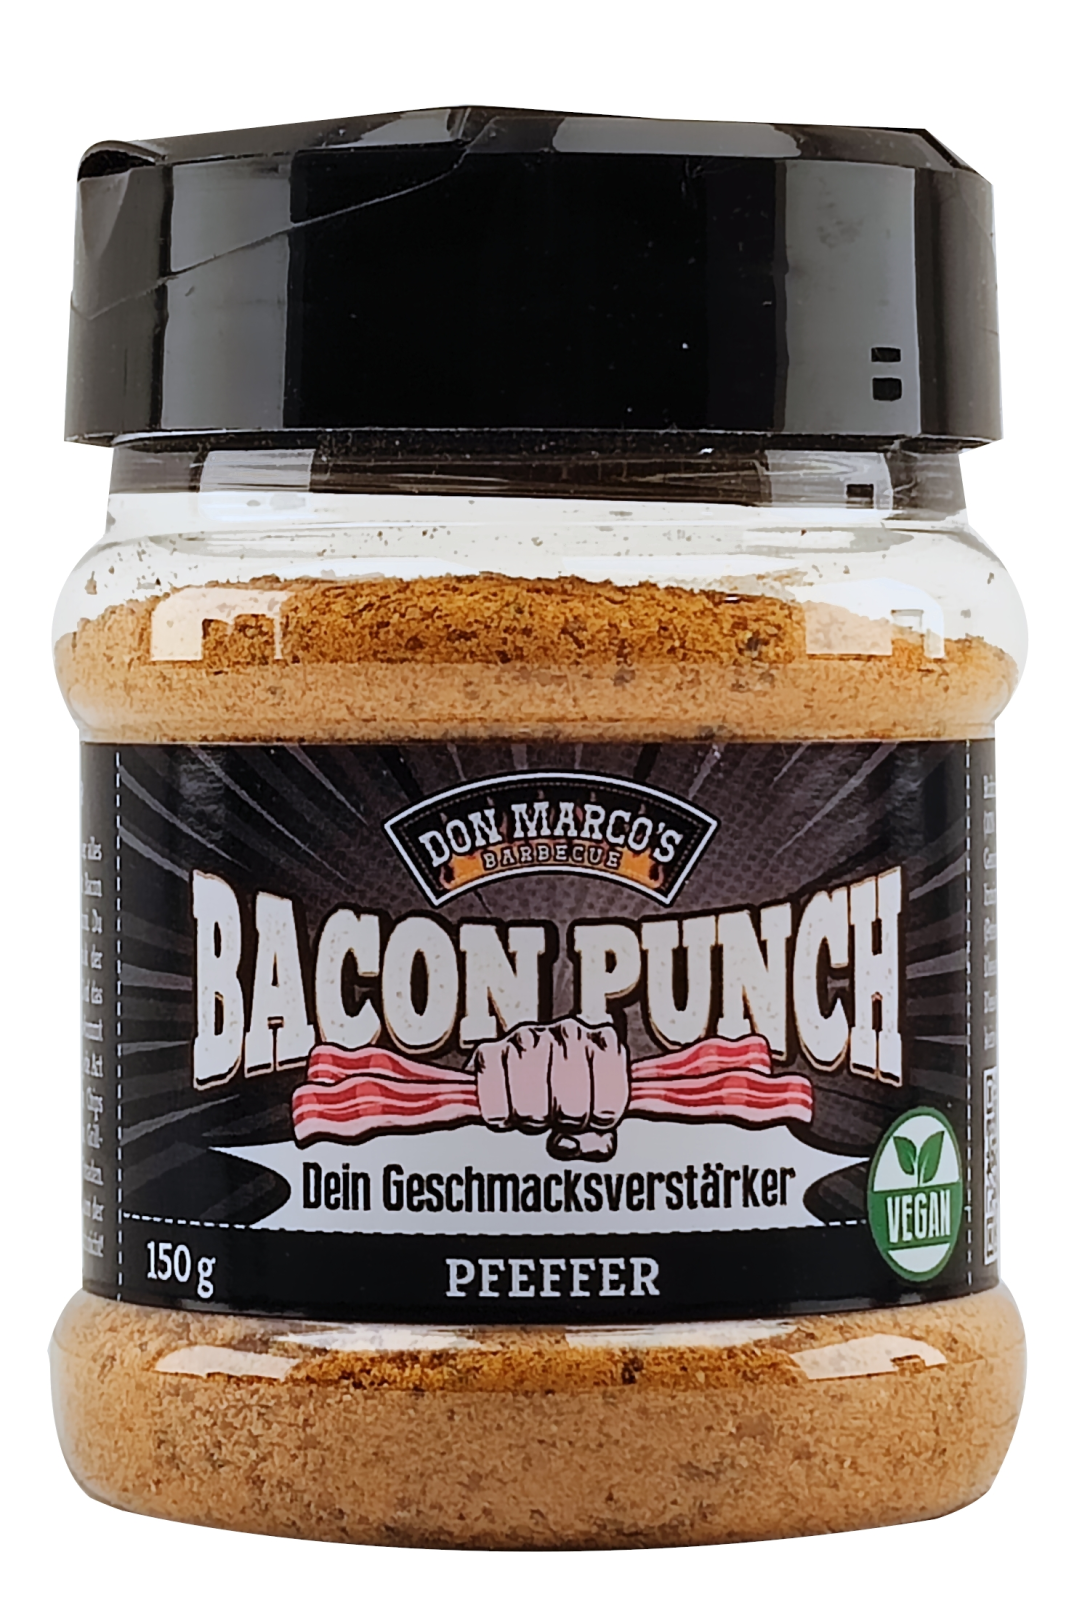 Don Marco’s Barbecue Bacon Punch Pfeffer 150g